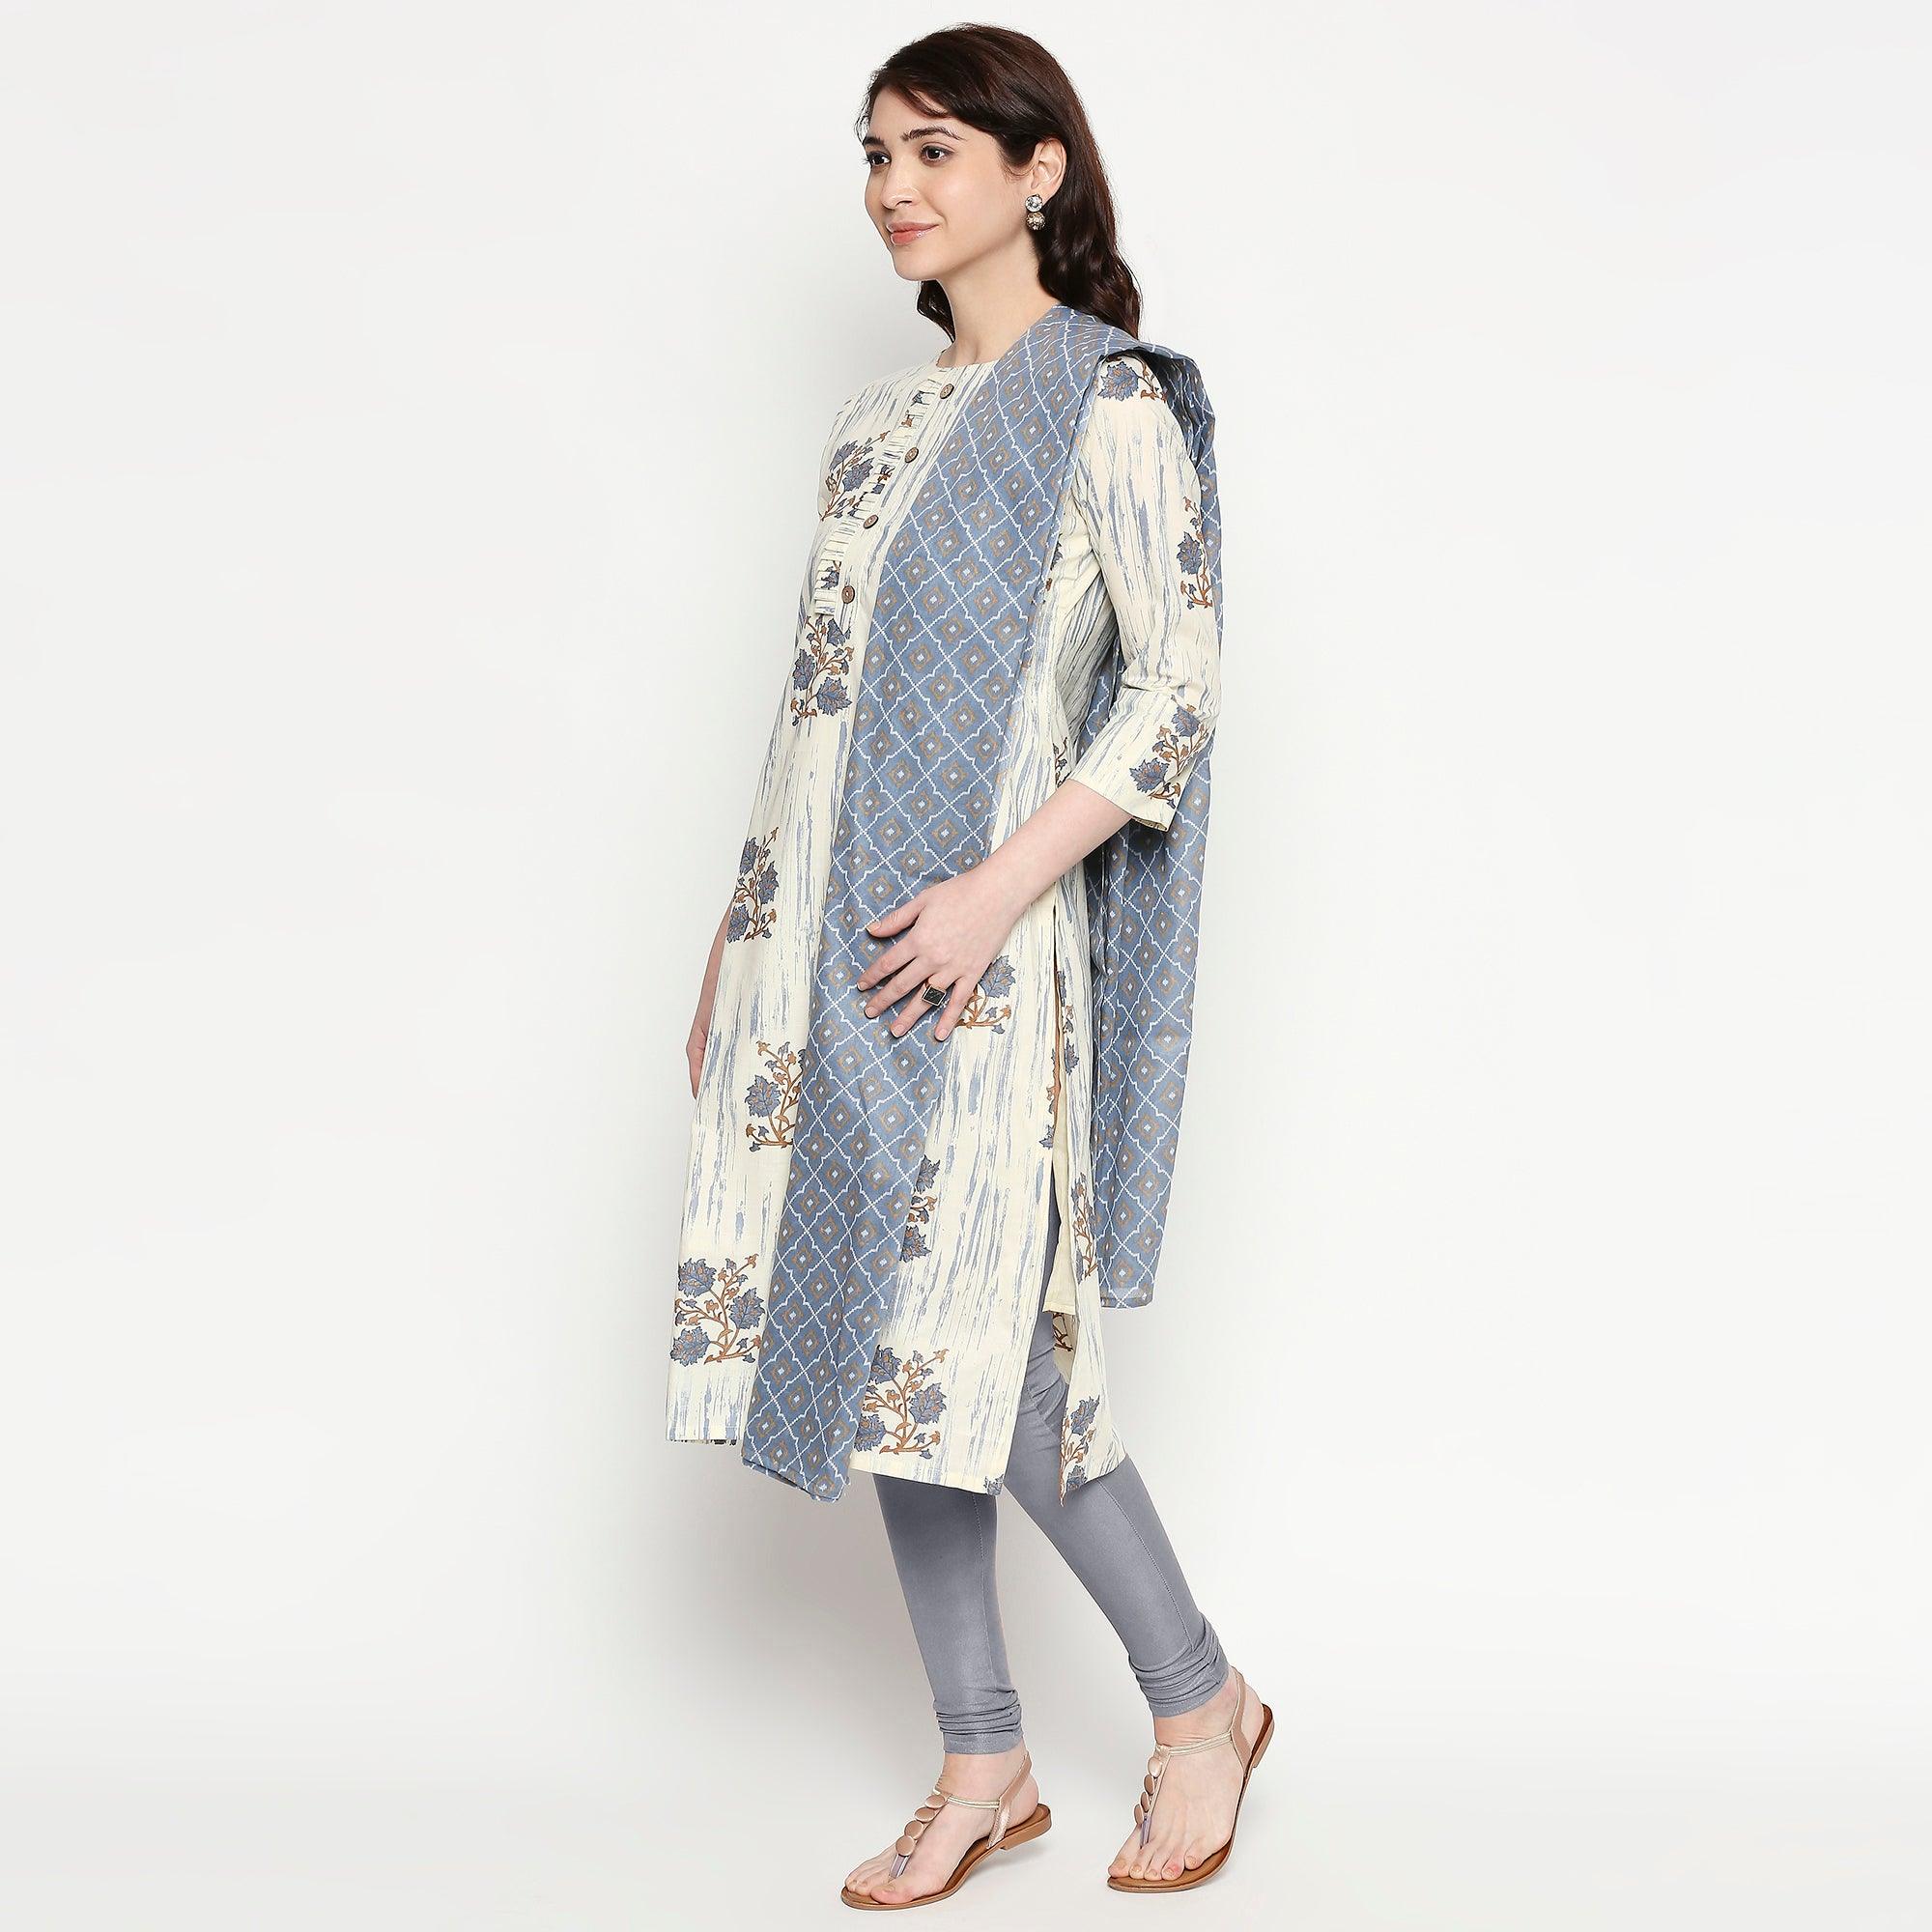 Glorious White-Grey Colored Casual Wear Floral Printed Cotton Kurti With Dupatta - Peachmode